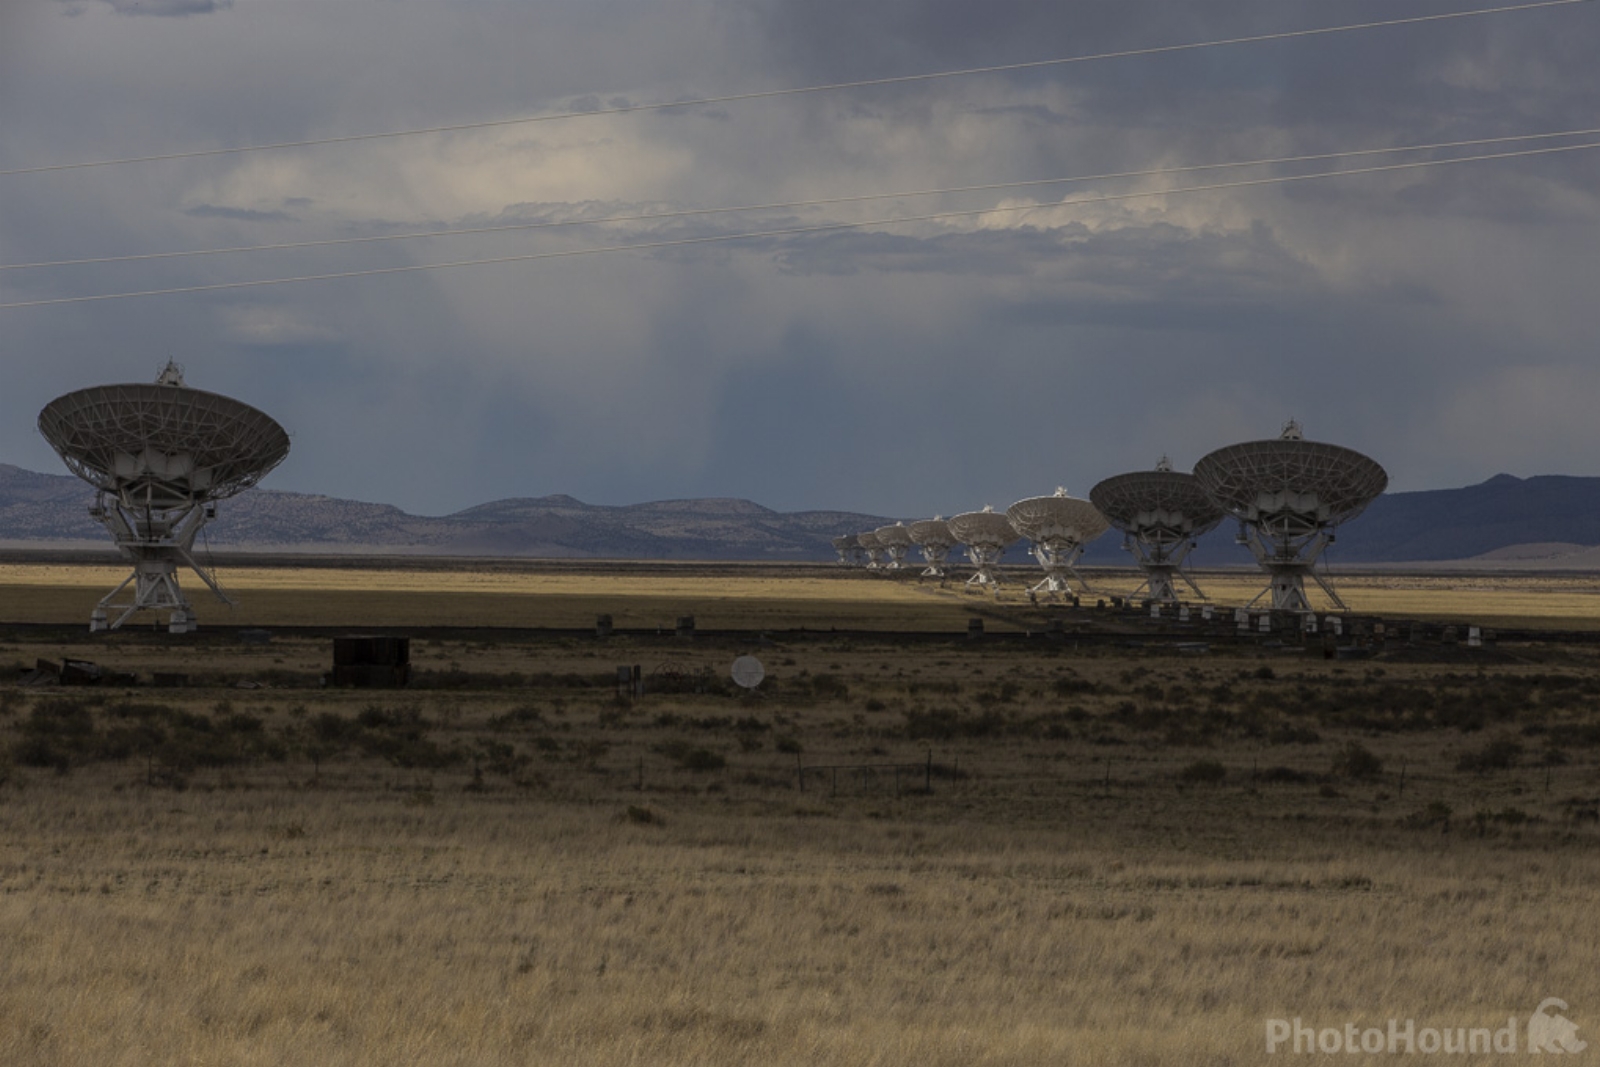 Image of Very Large Array by Angelika Vieth